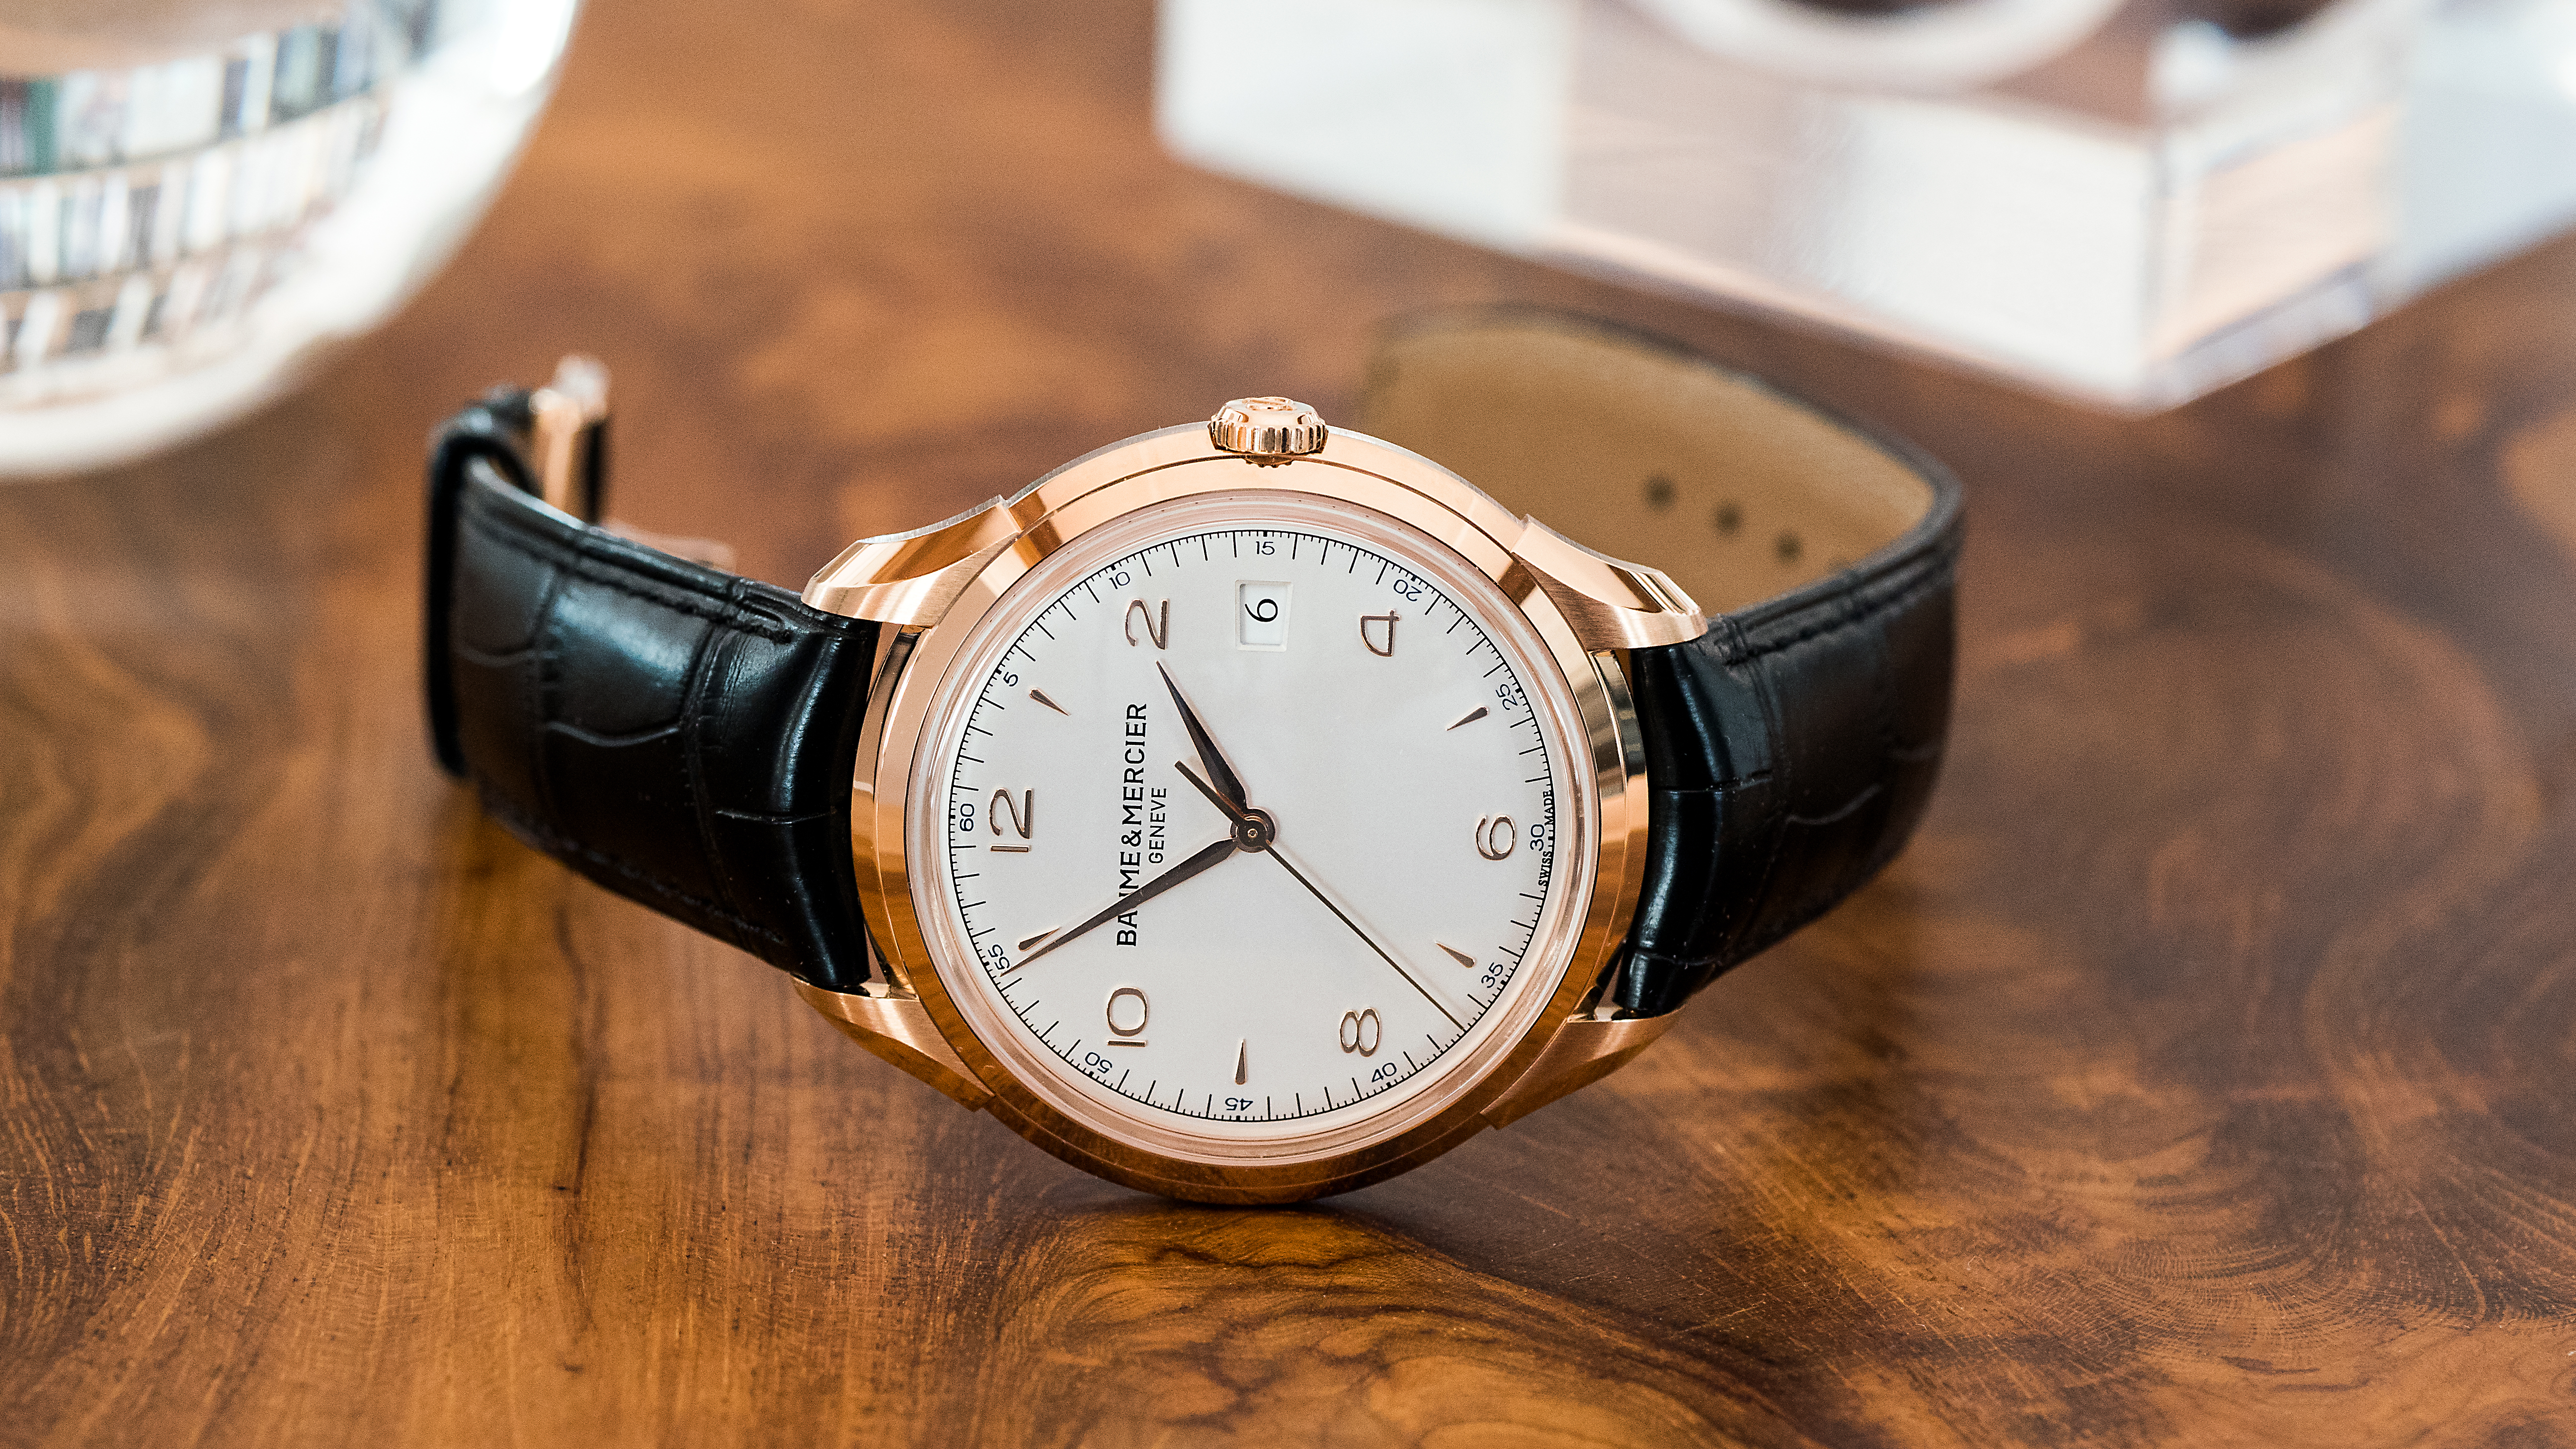 Gary Shteyngart Can't Stop Thinking About The Patek Philippe 3940.